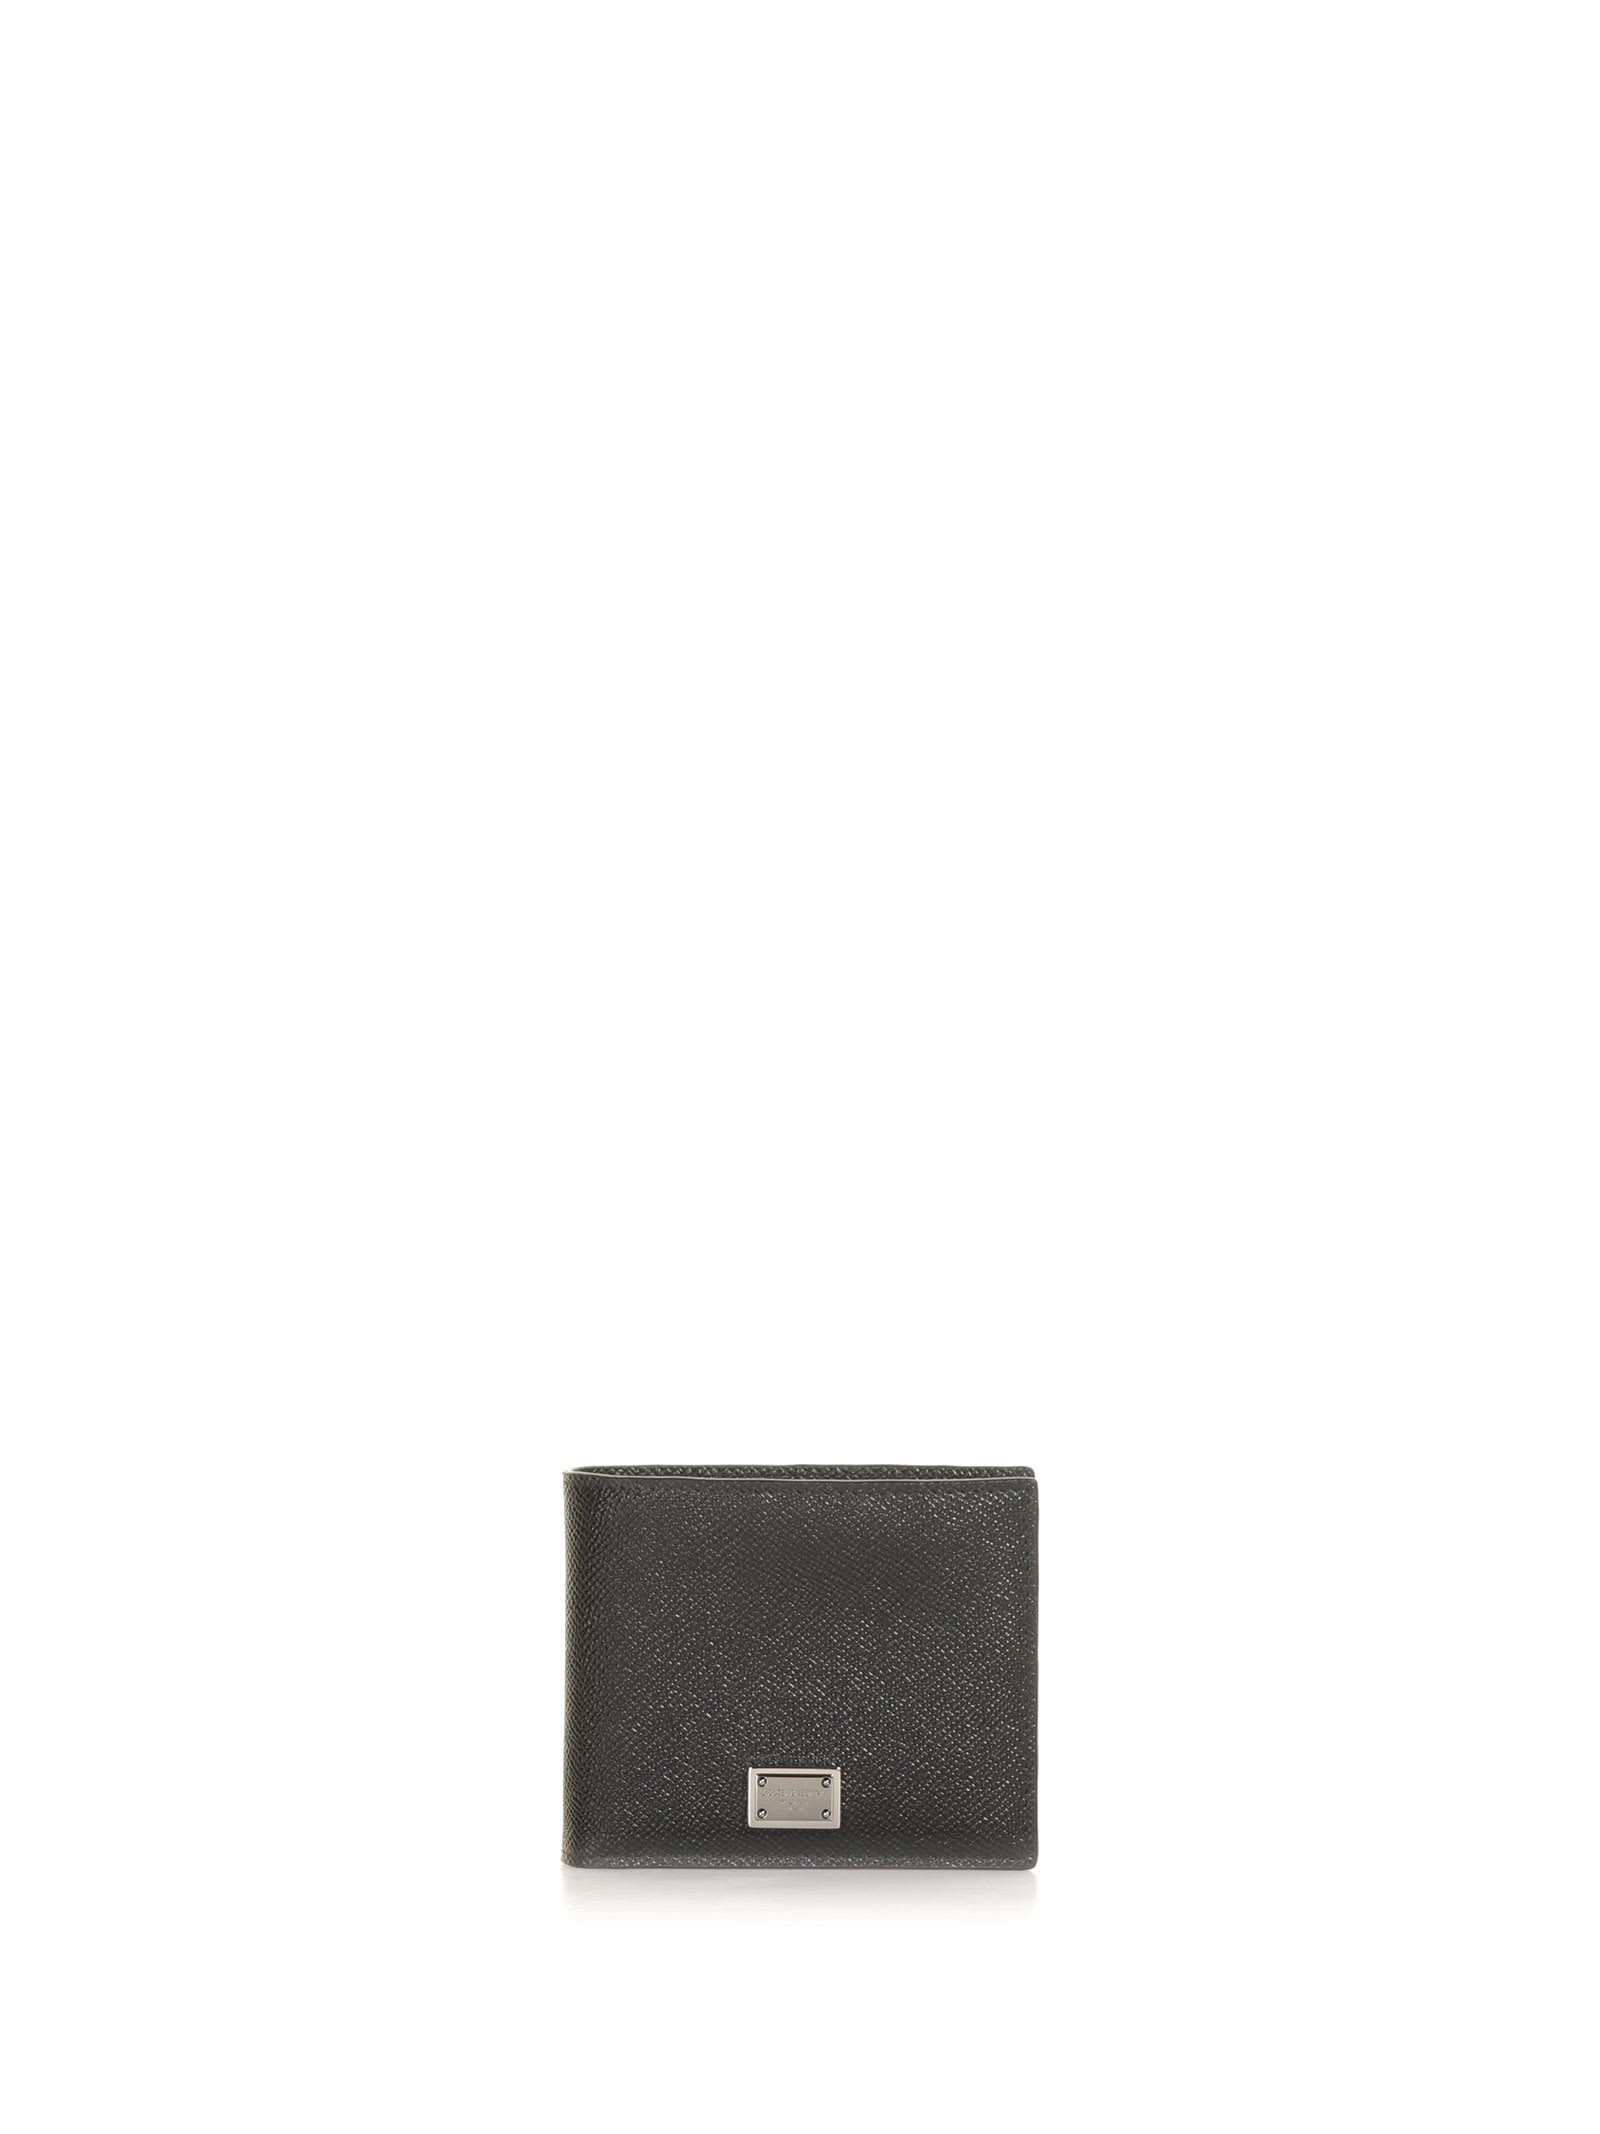 Dolce & Gabbana Leather Wallet With Coin Purse In Nero